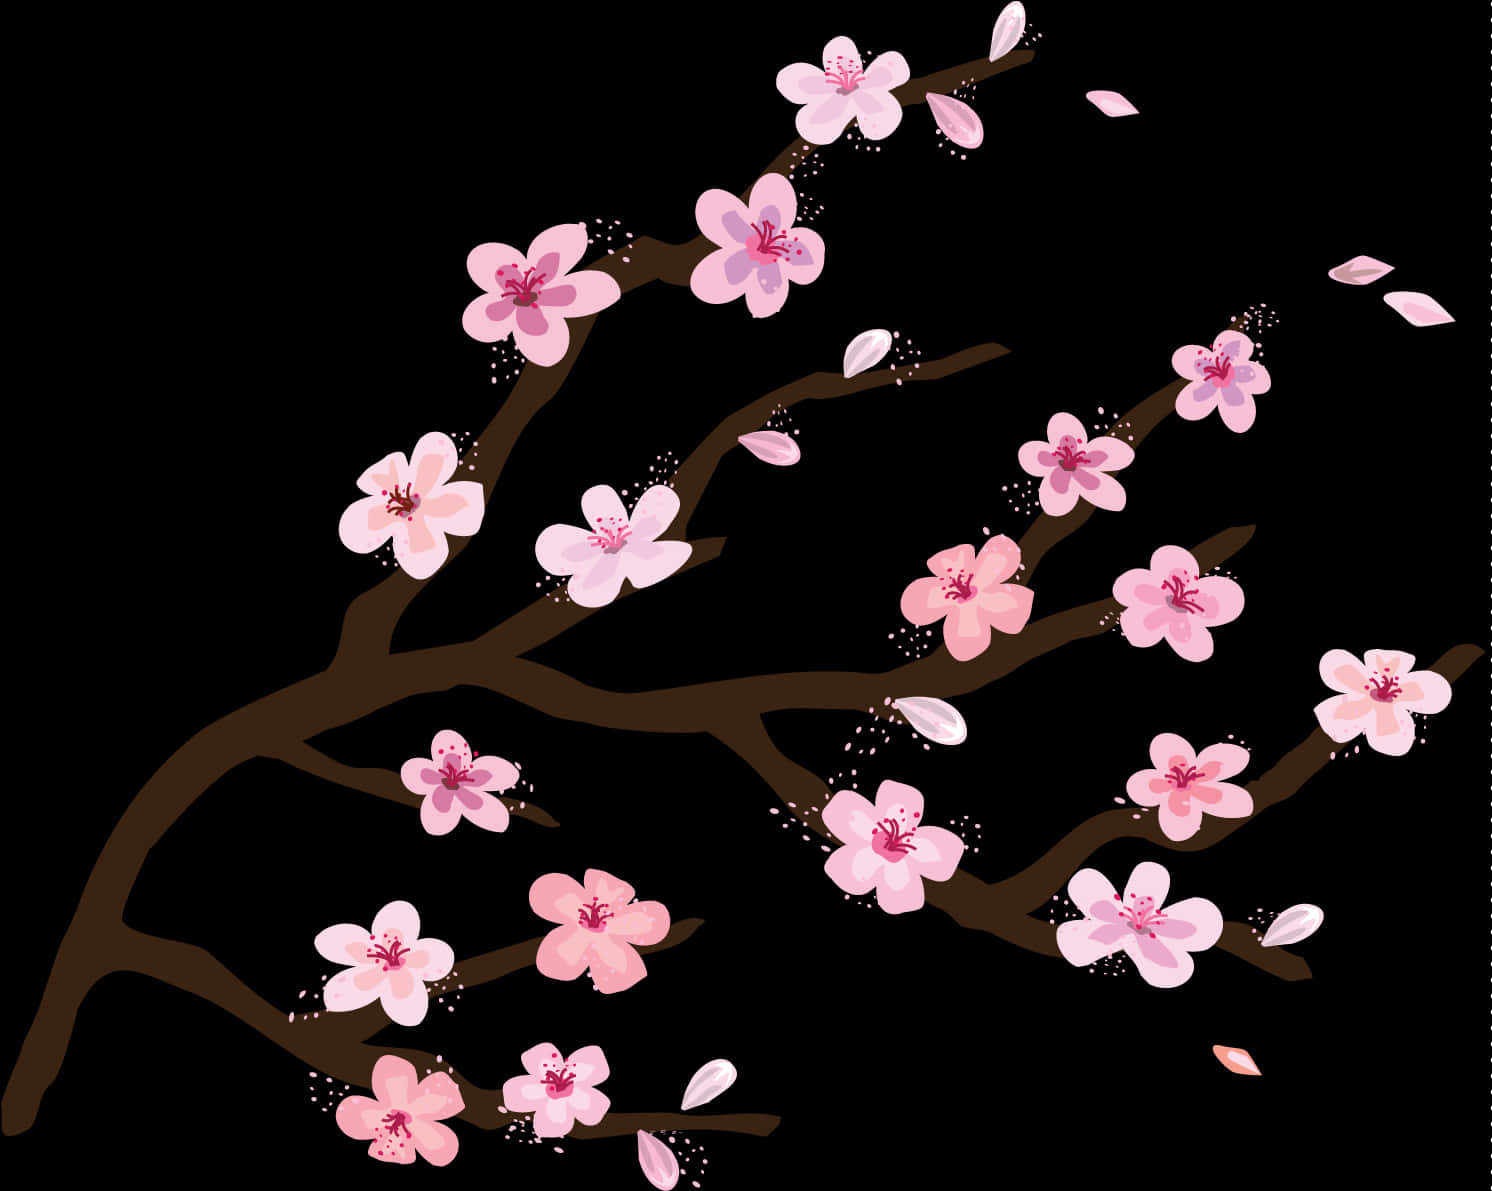 A Tree Branch With Pink Flowers